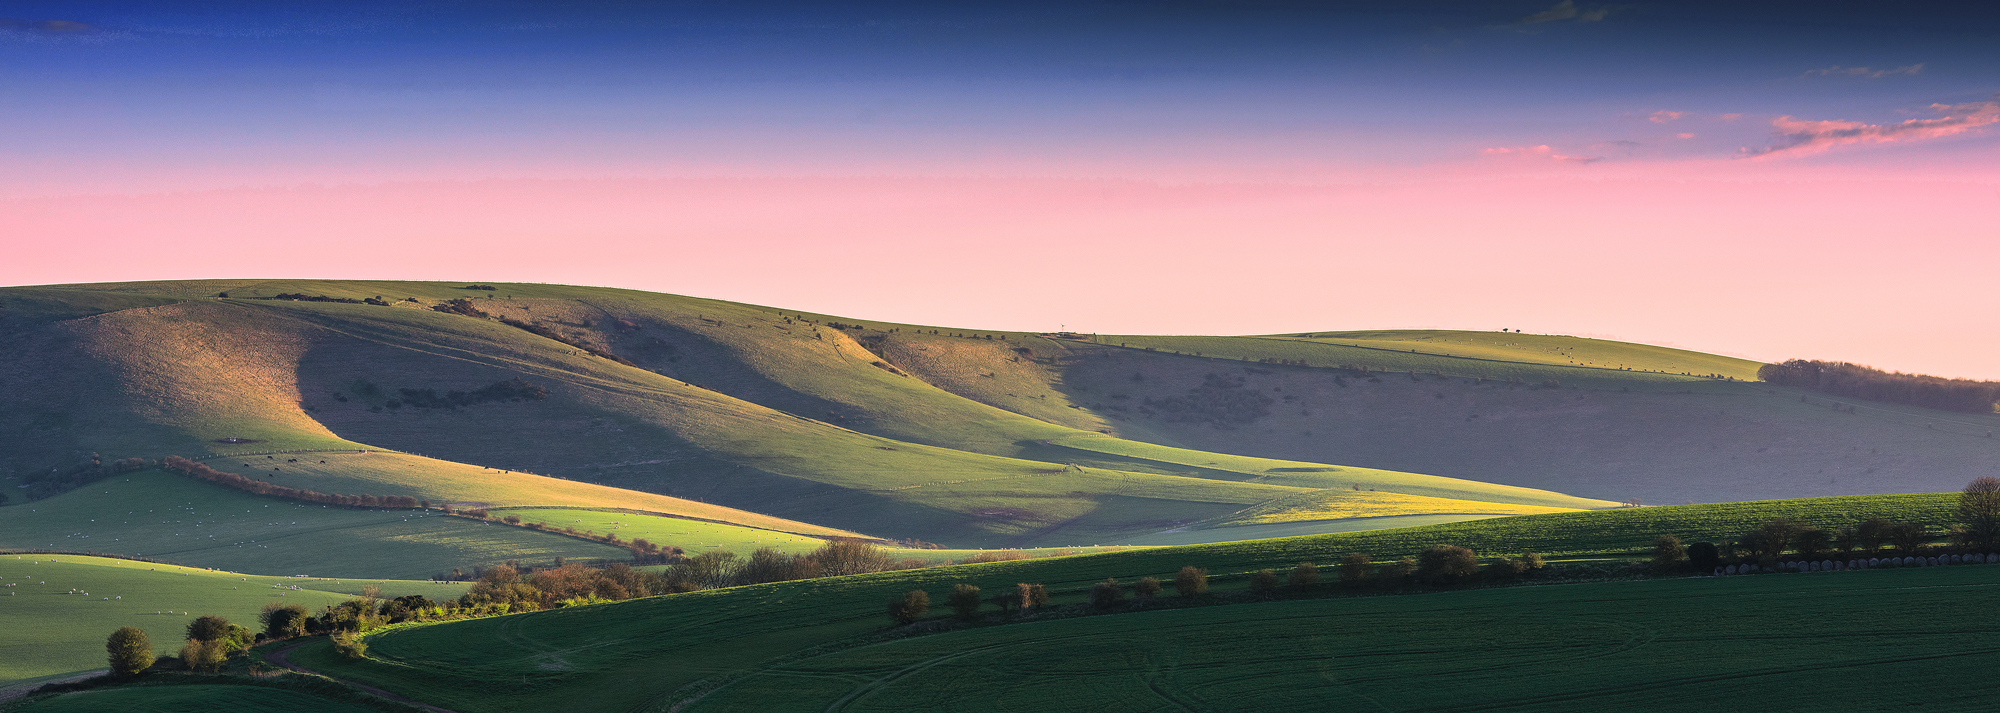 DOWNLAND SUNSET By STEVE OAKES LRPS (2)